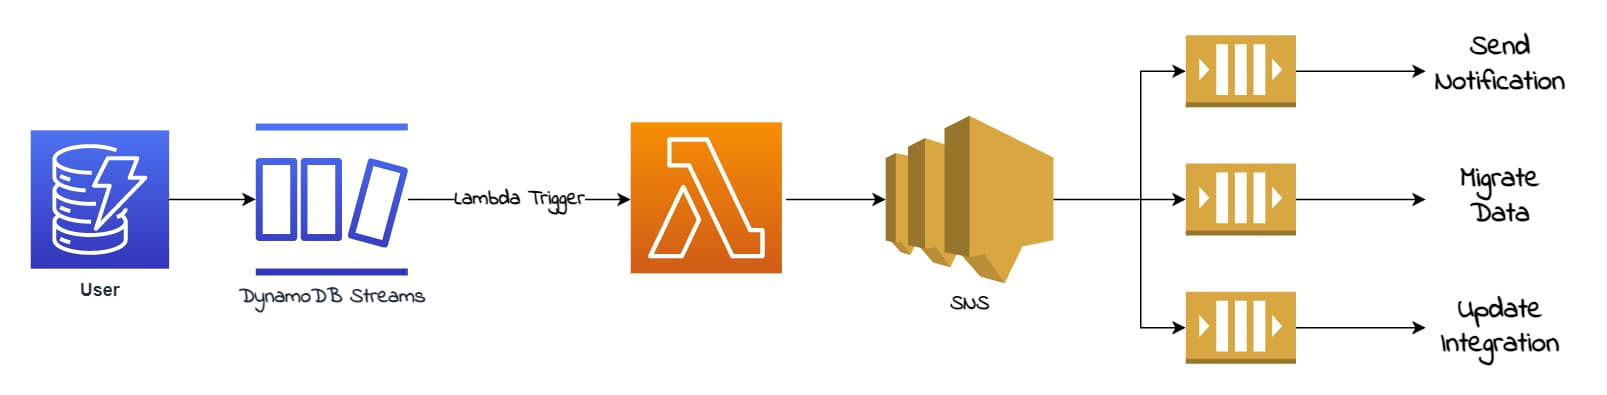 DynamoDB Streams handling stream events using SNS fanout pattern to handle multiple independent subscribers for the same event.